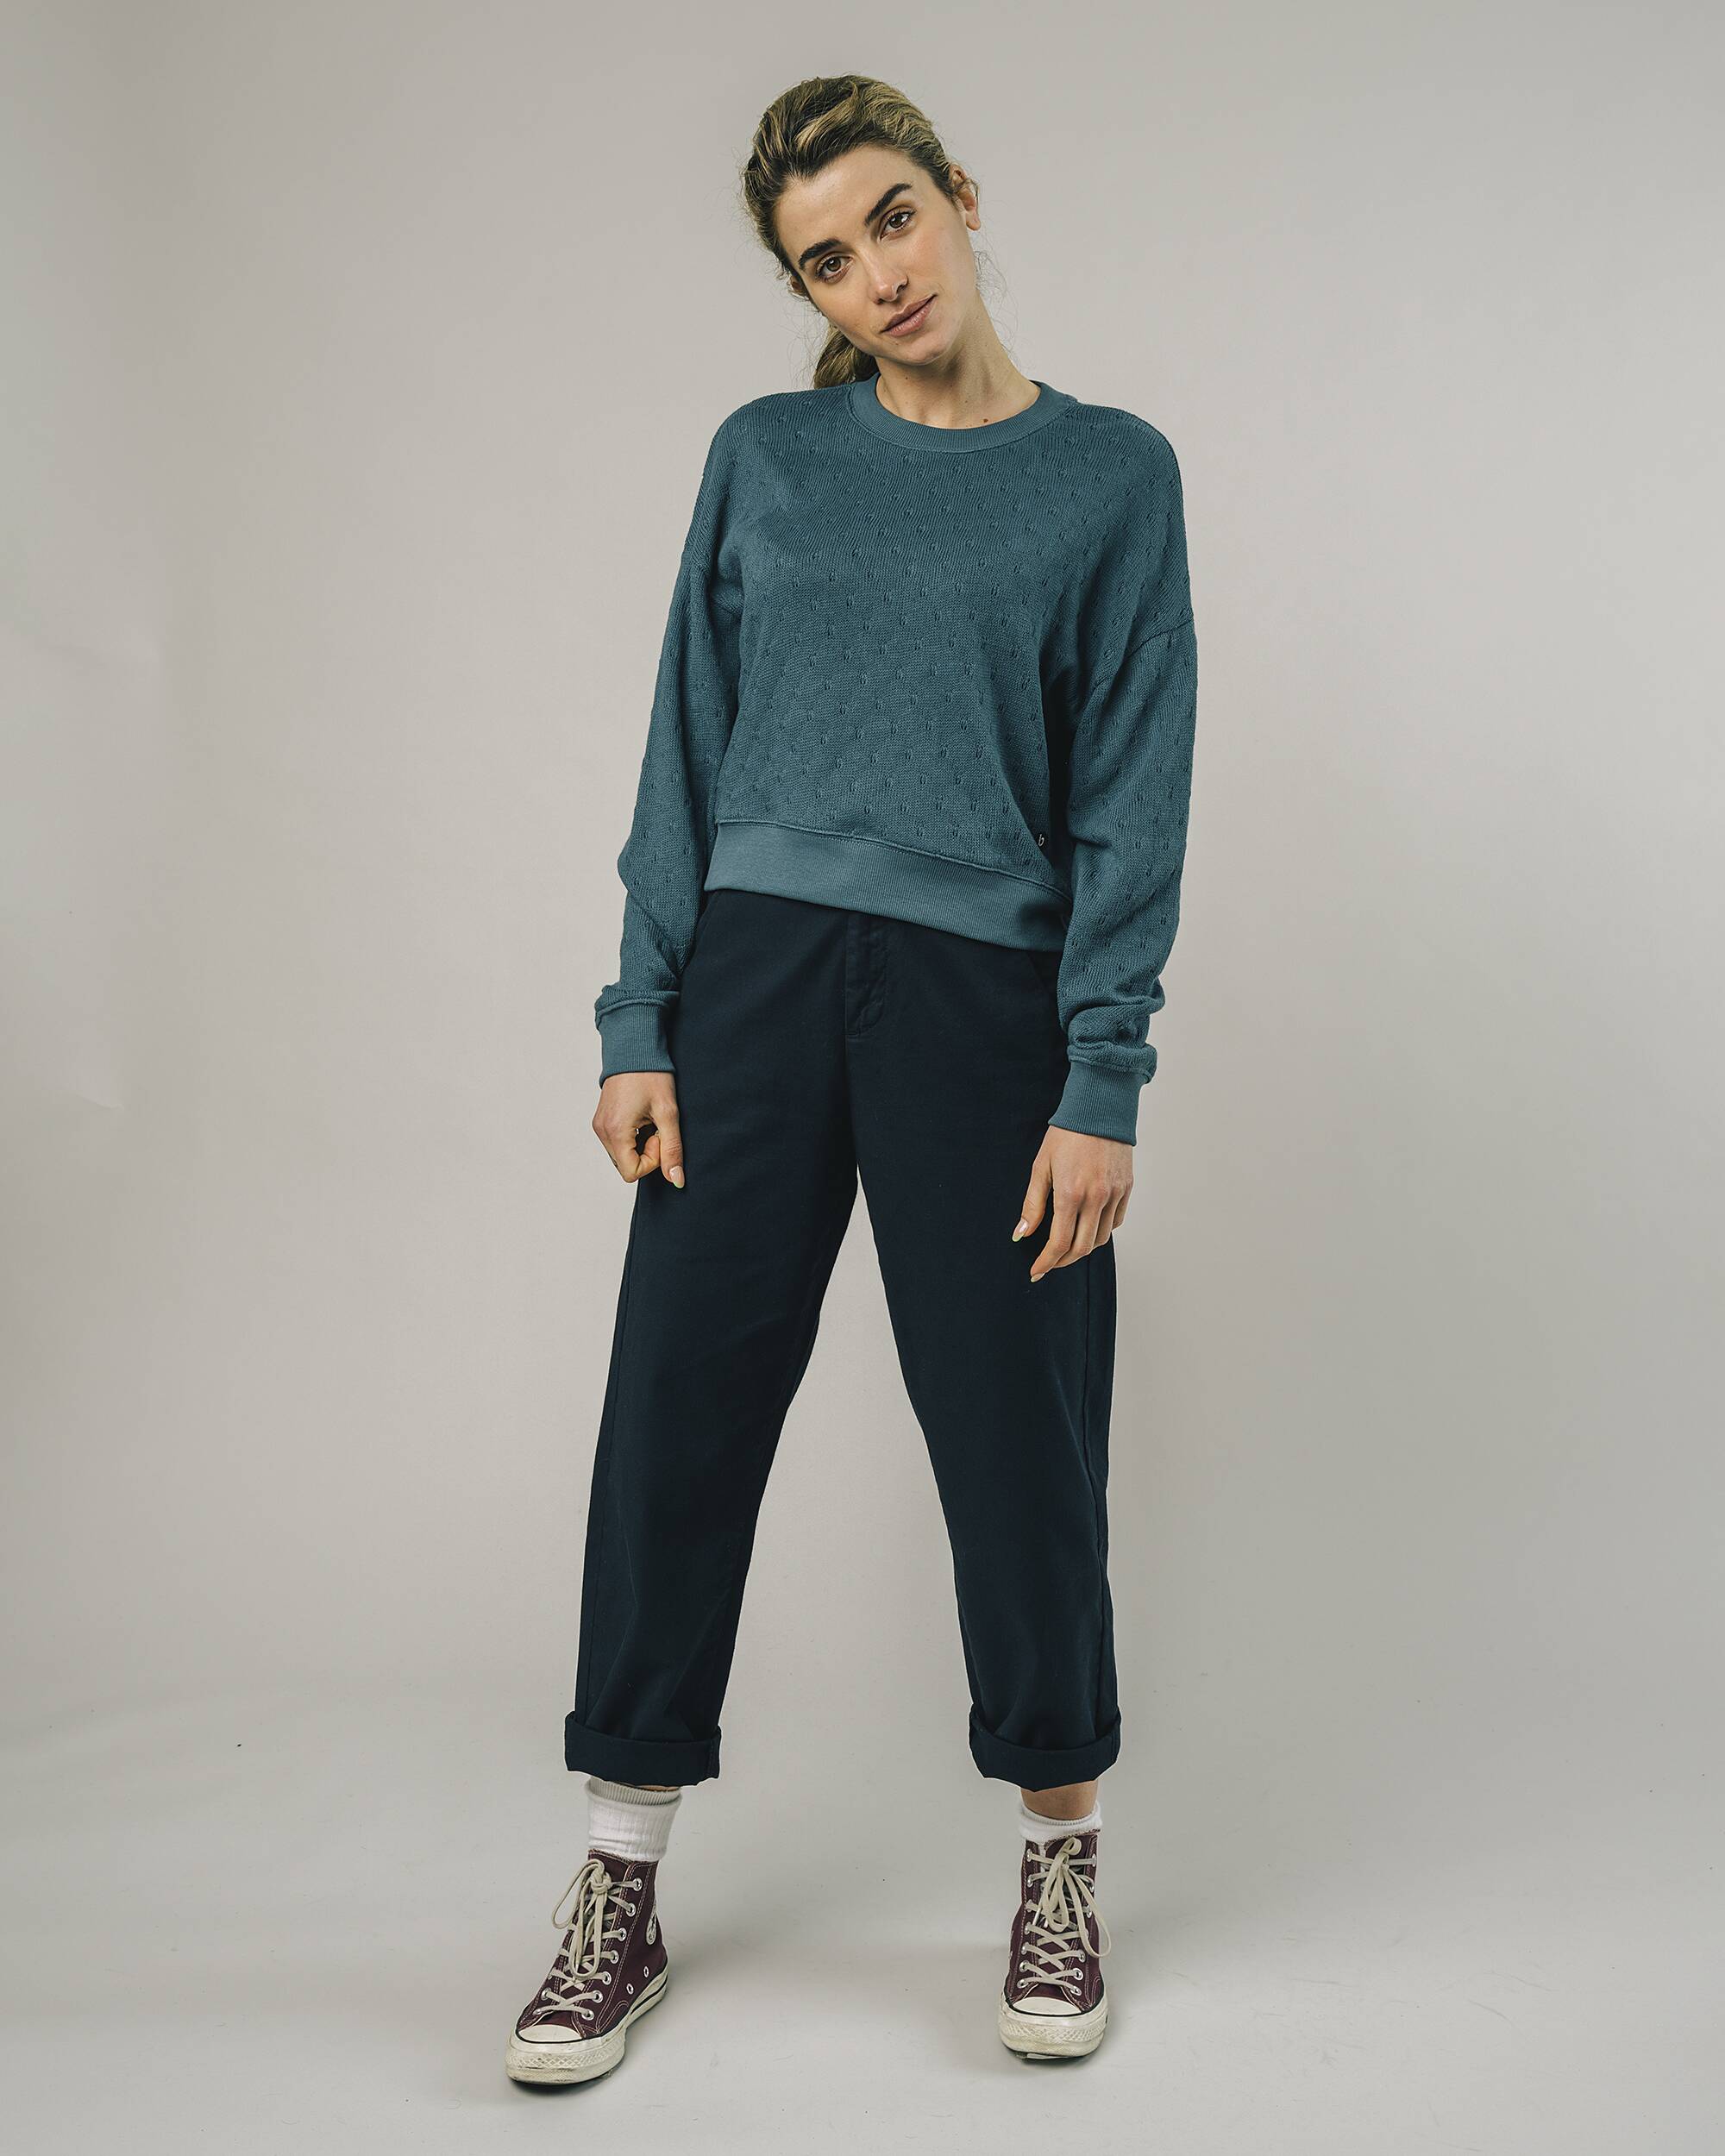 Oversized sweater "Lace" in blue / turquoise made from 100% organic cotton from Brava Fabrics